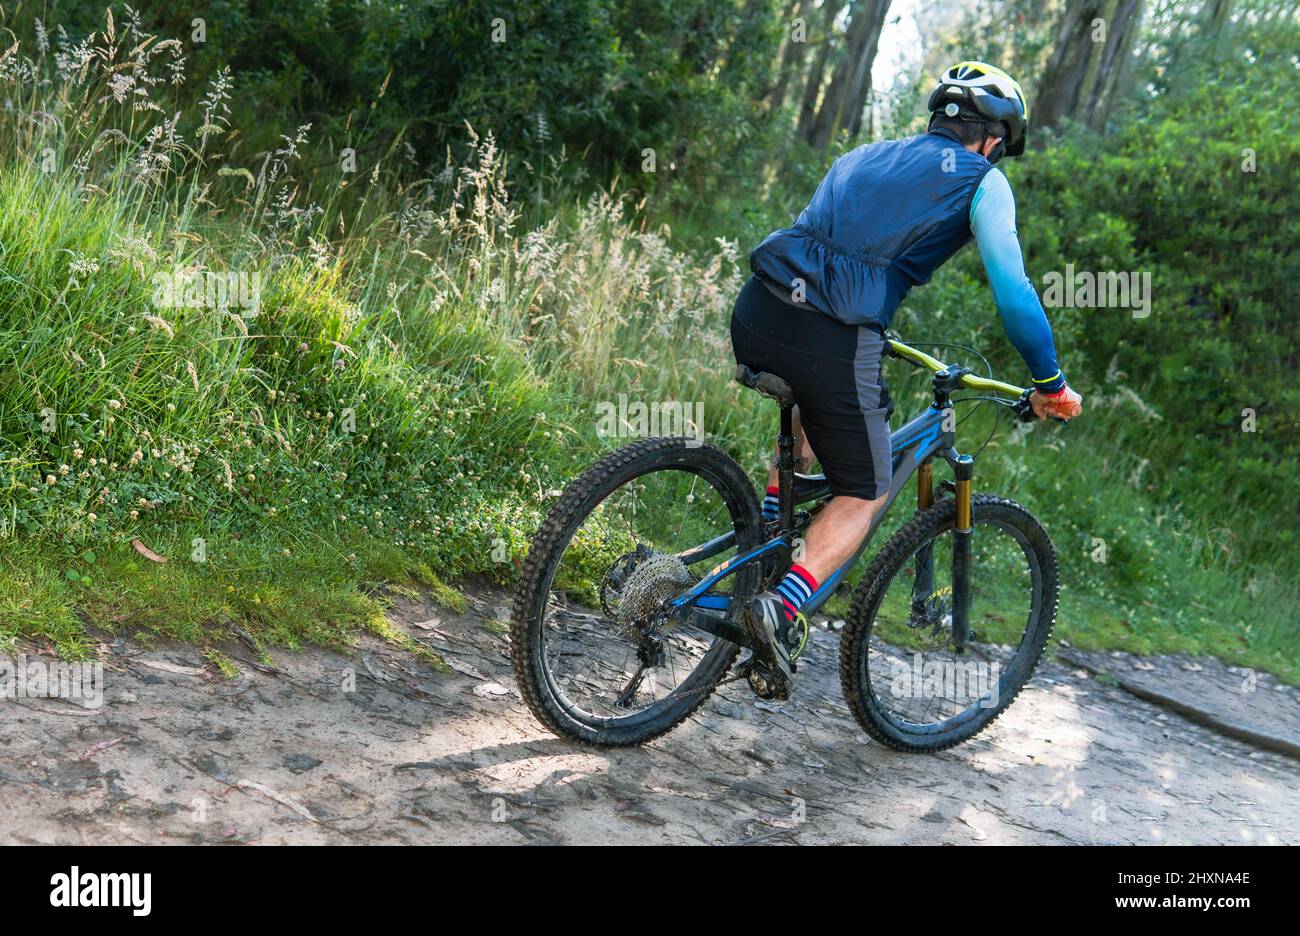 back view of a helmeted man riding a mountain bike on a forest trail. Concept of mountain biking and outdoor sport. Stock Photo